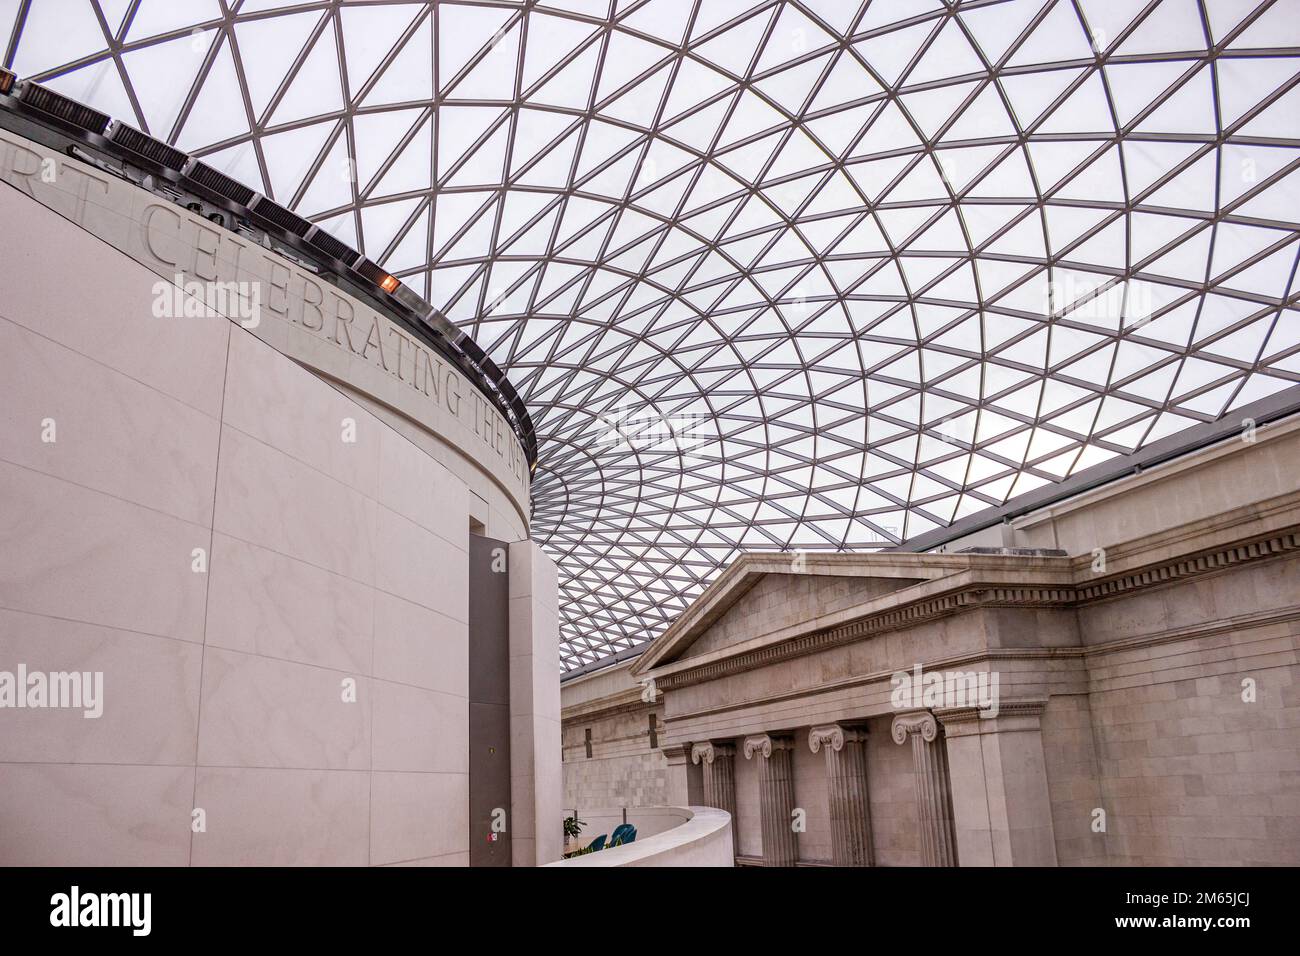 Interior view of the Great Court at the British Museum, a public museum dedicated to human history, art and culture in London. Stock Photo